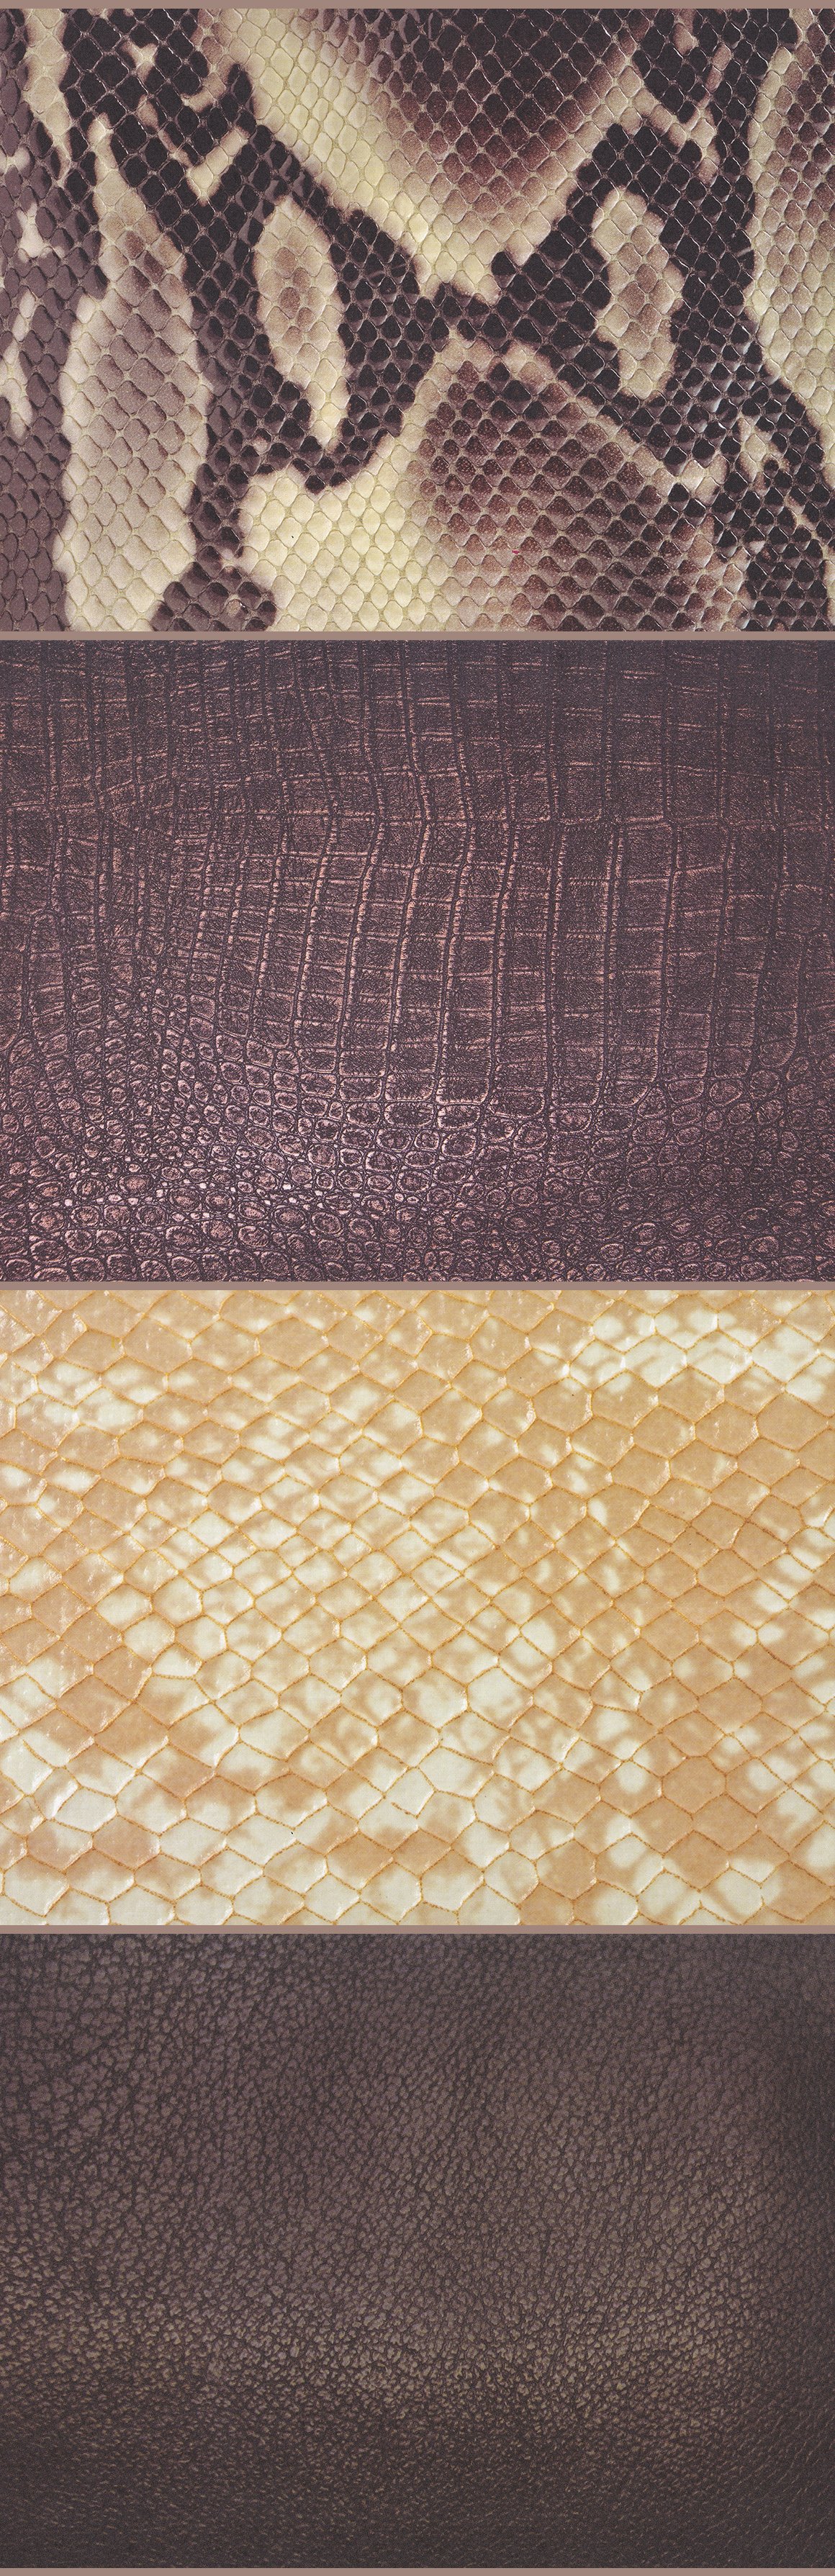 Scales and Skins Textures